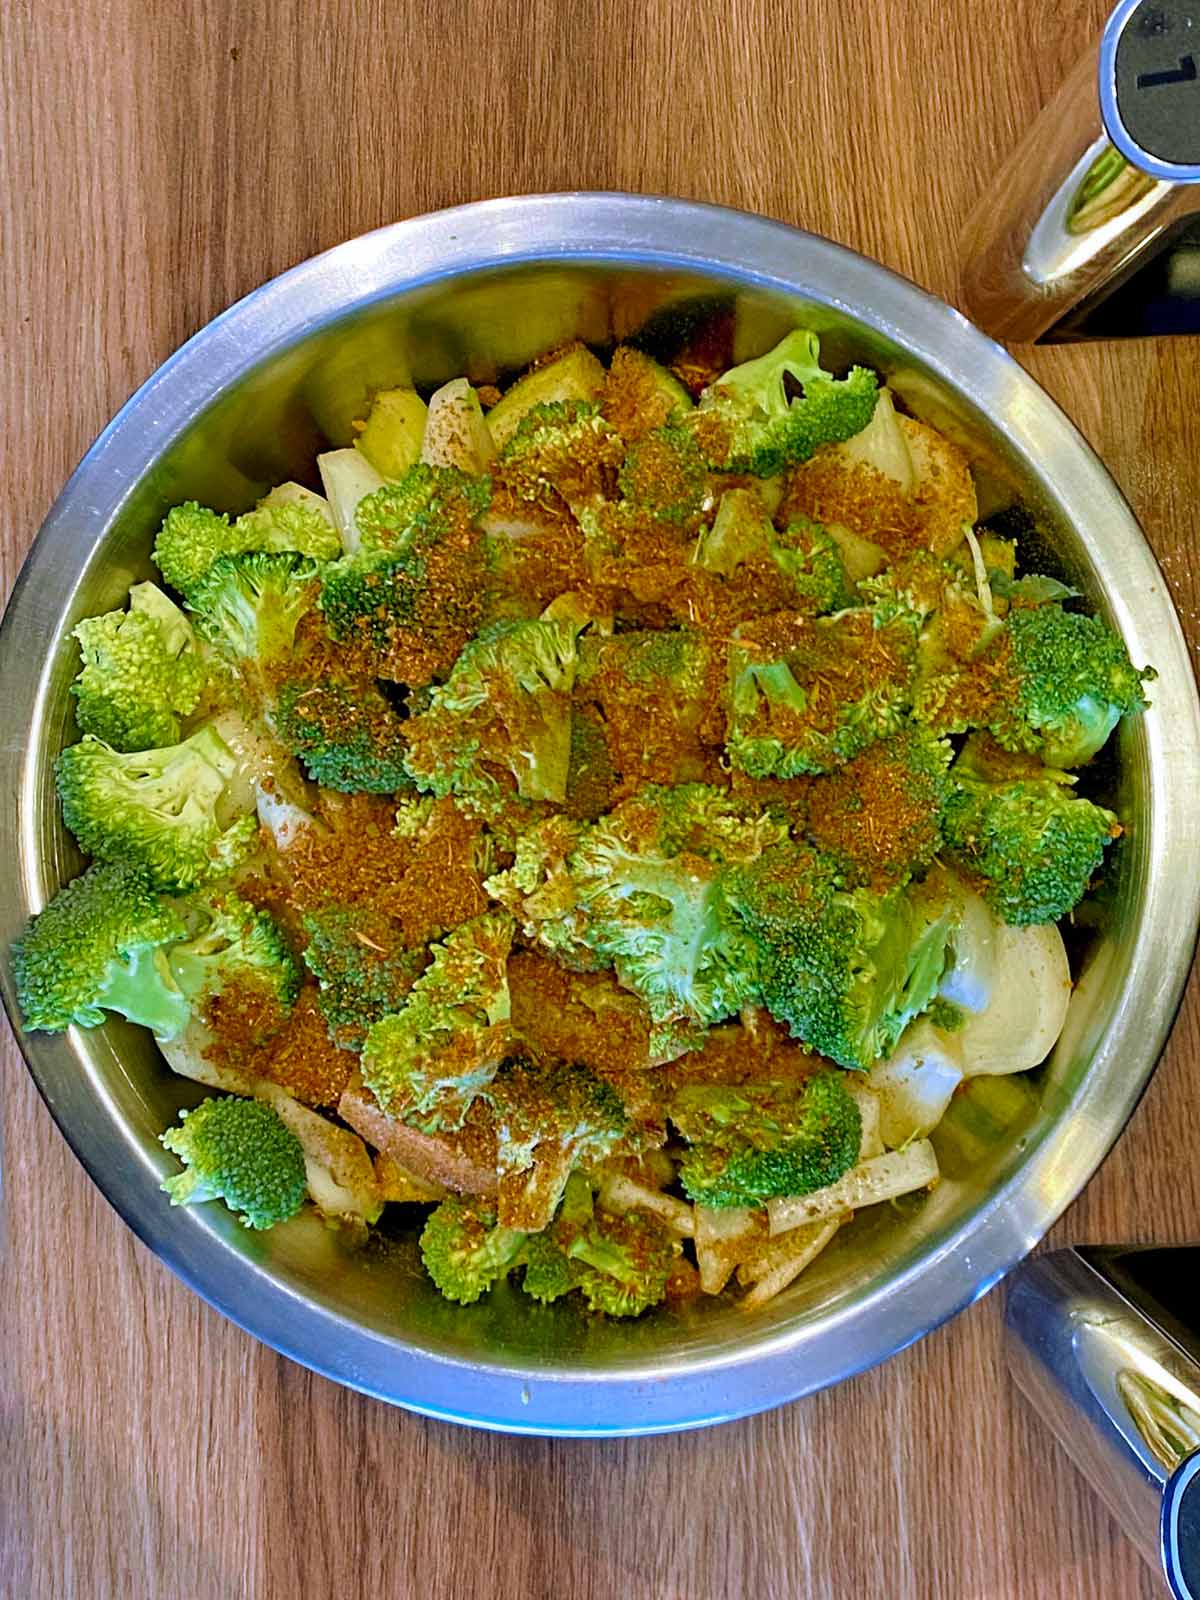 Chopped vegetables in a bowl covered in seasoning.